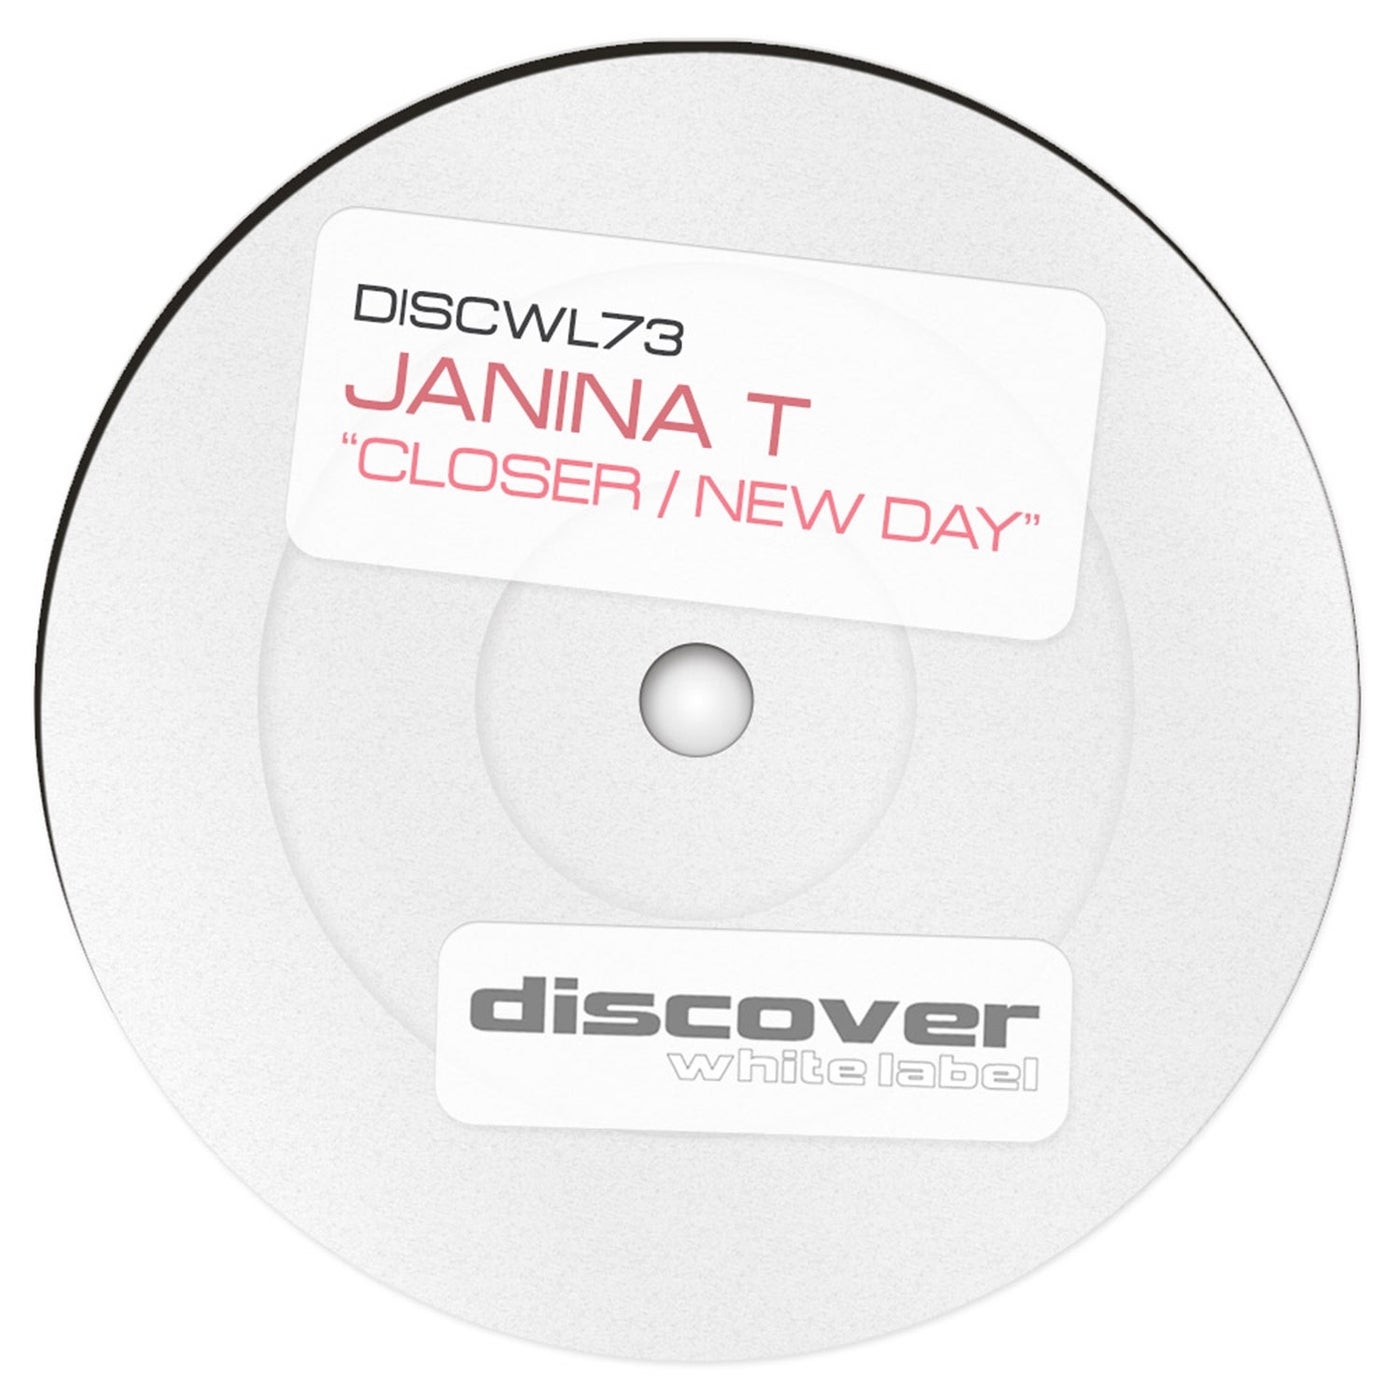 Closer / New Day